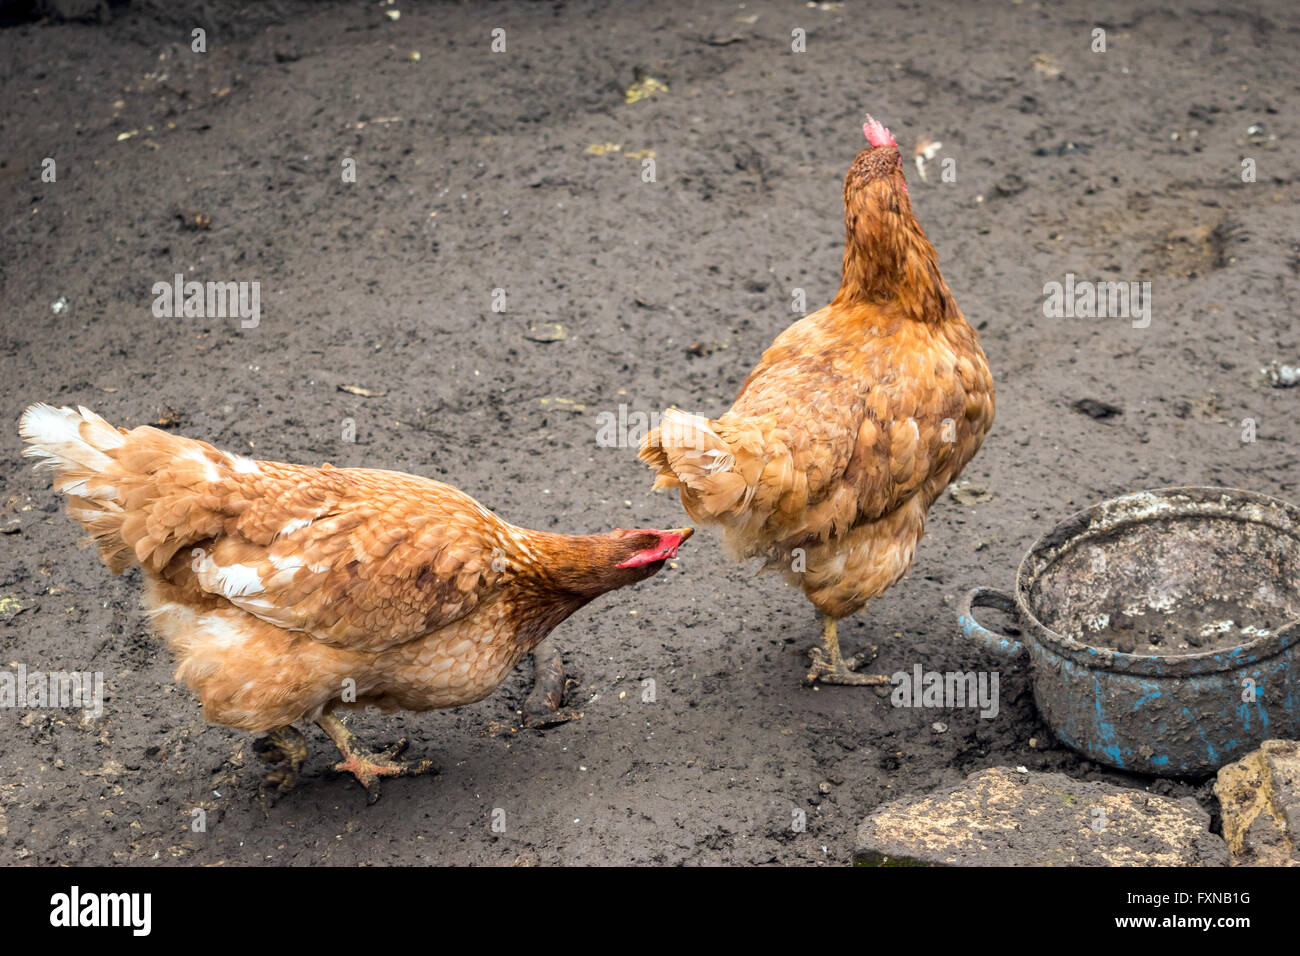 Hen pecking, feather eating, cannibalism (Social behaviour to establish a position in social hierarchy) Stock Photo